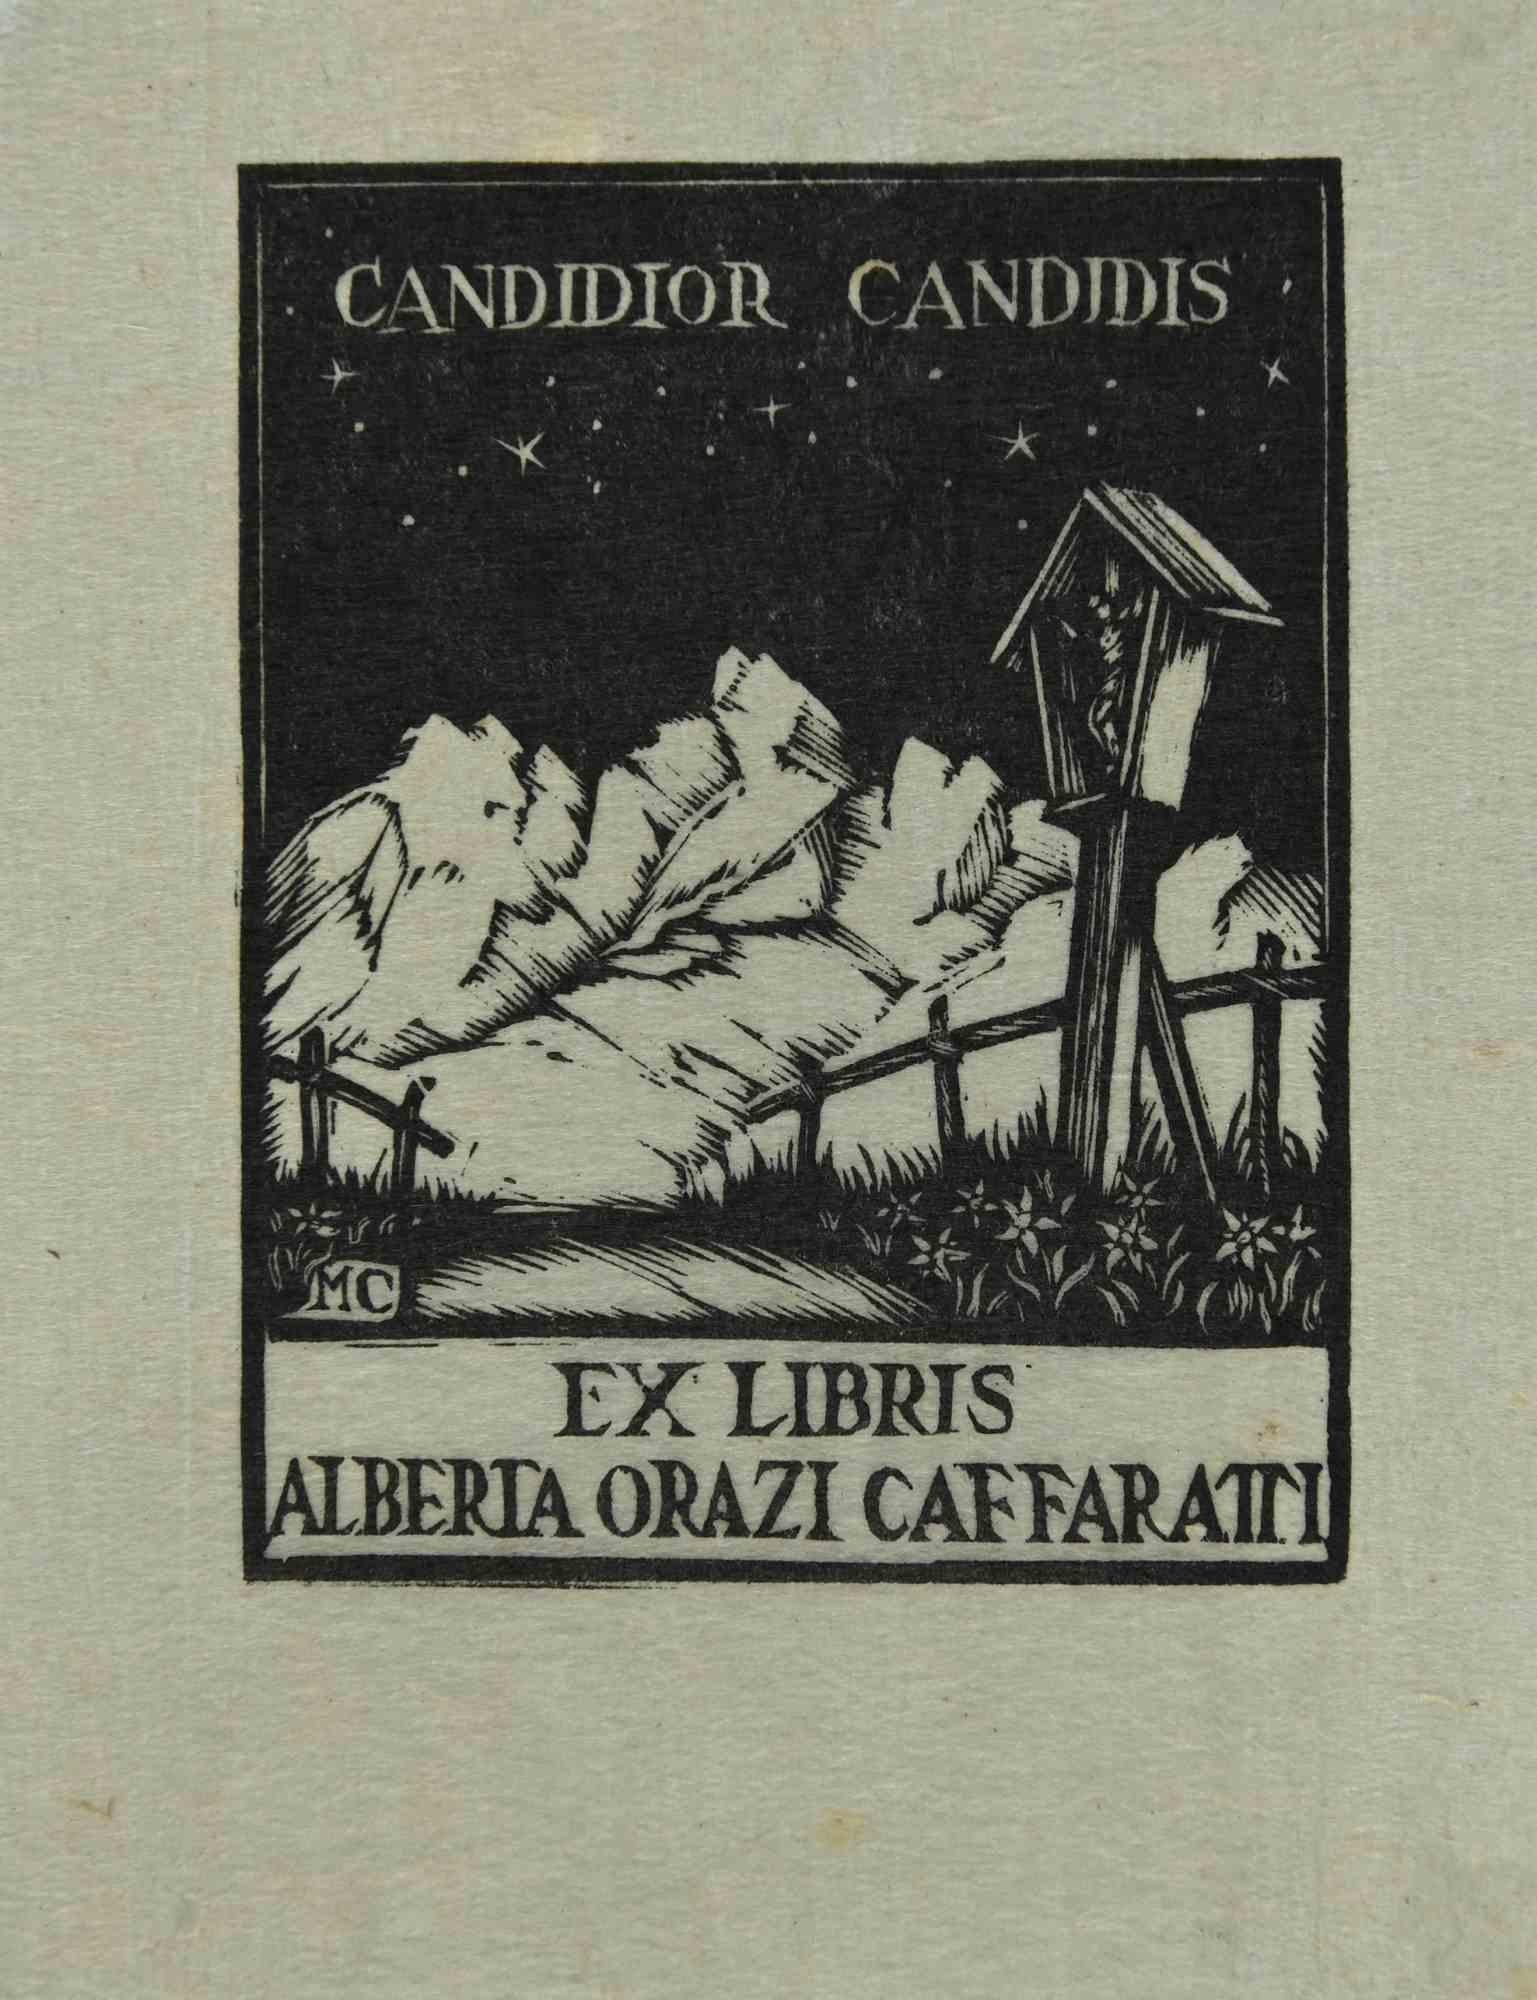 Ex-Libris - Alberta Orazi Caffaratti  is an Artwork realized in Mid 20th Century, by the artist Jorg Gambini. 

Woodcut print on tissue paper. 

Good conditions.

The artwork represents a minimalistic, clean design, through preciseness and congruous